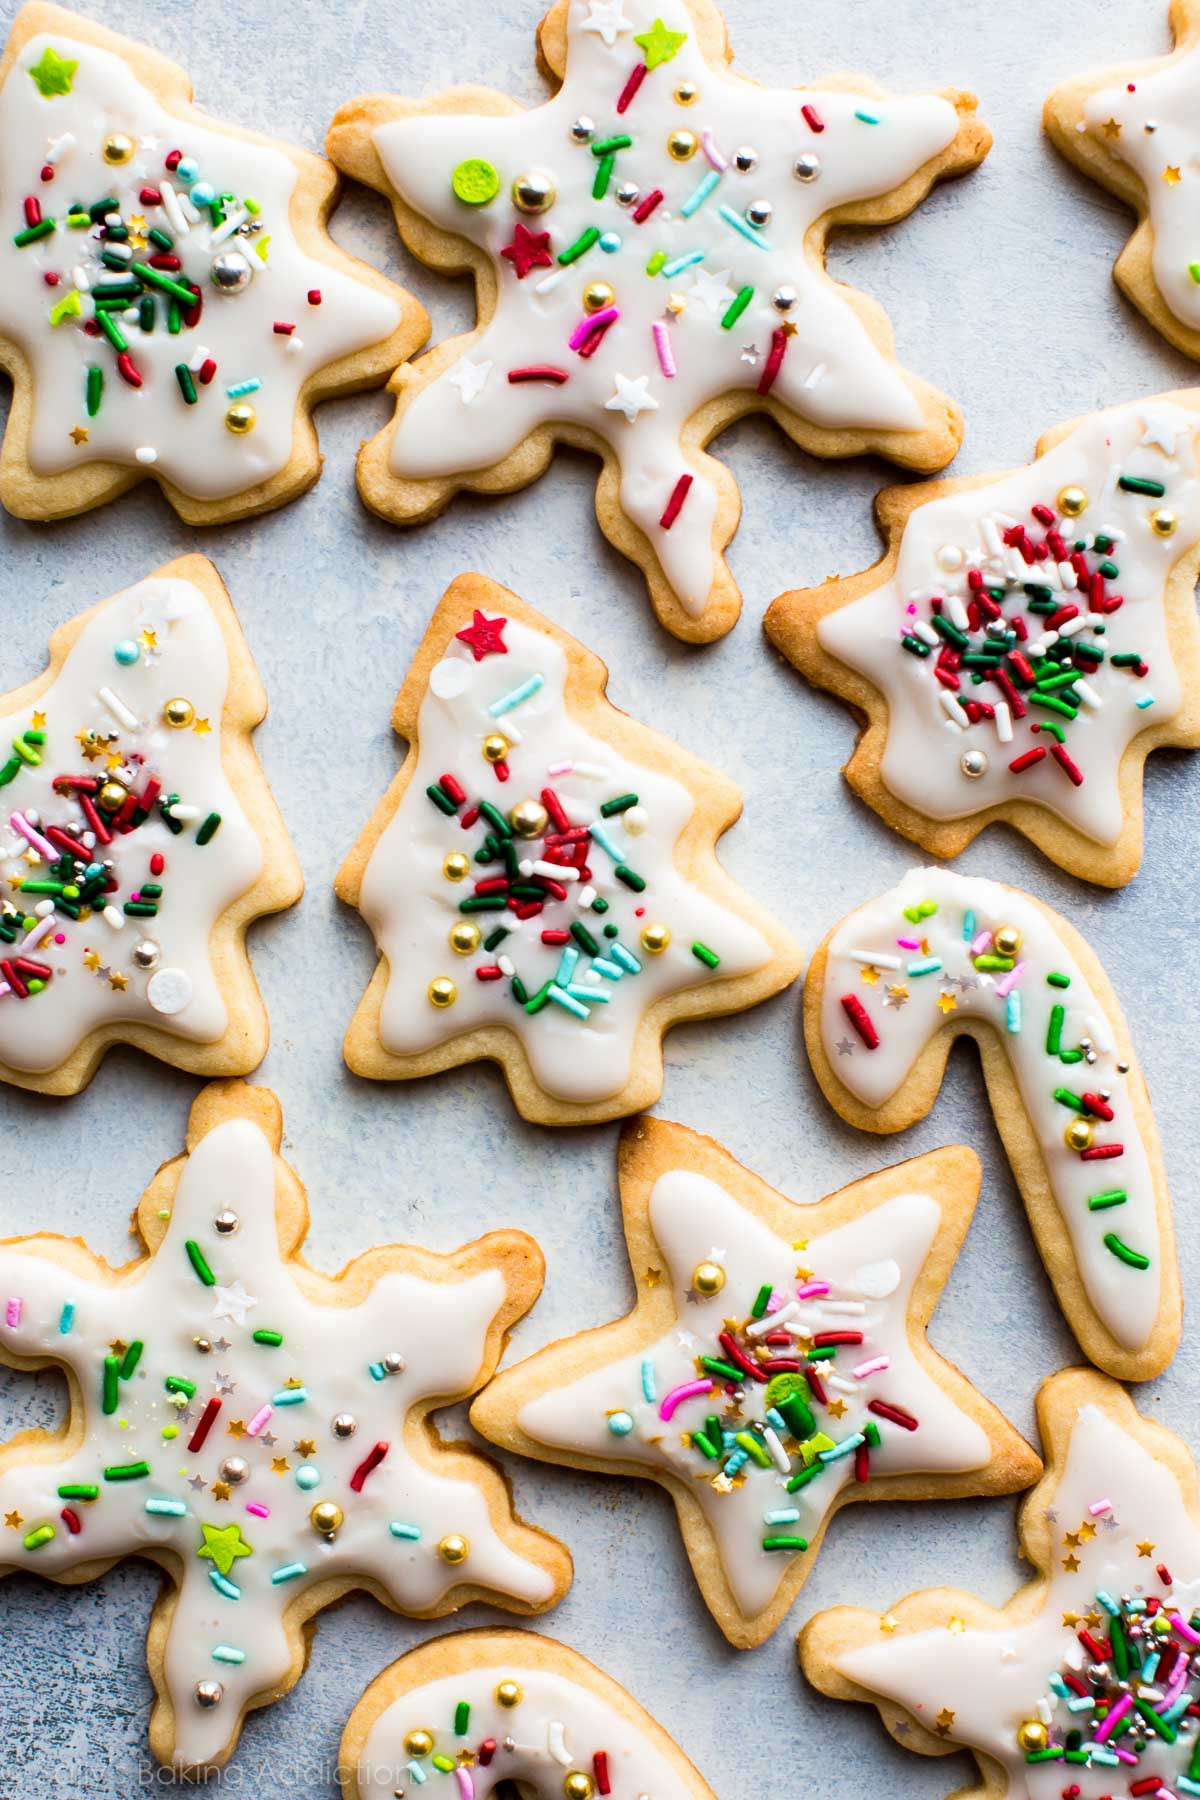 Image Of Christmas Cookies
 Holiday Cut Out Sugar Cookies with Easy Icing Sallys